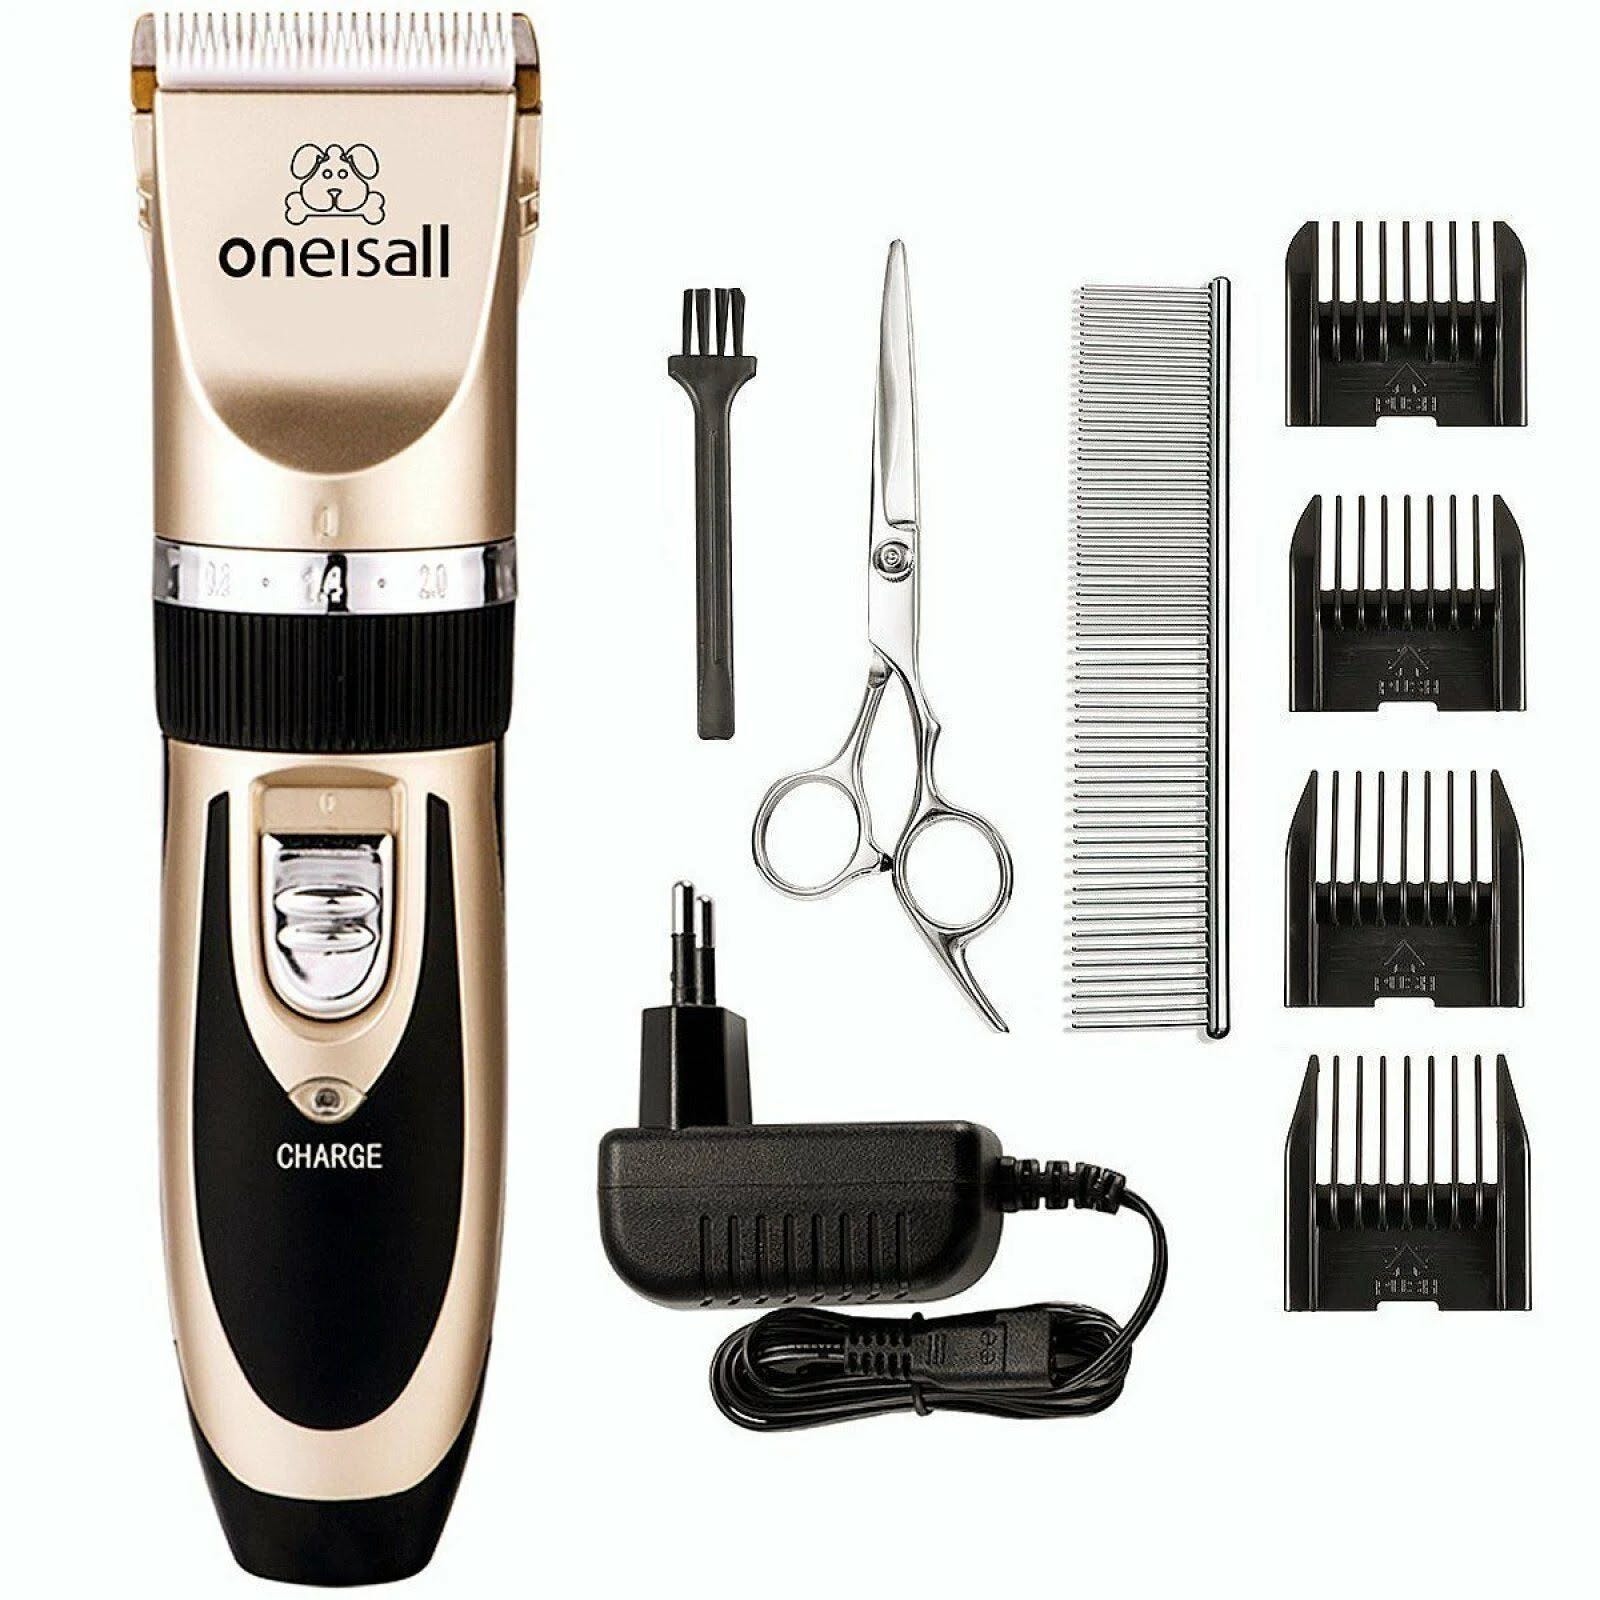 Quiet, Low-Vibration Dog Clippers for Perfect Fits | Image